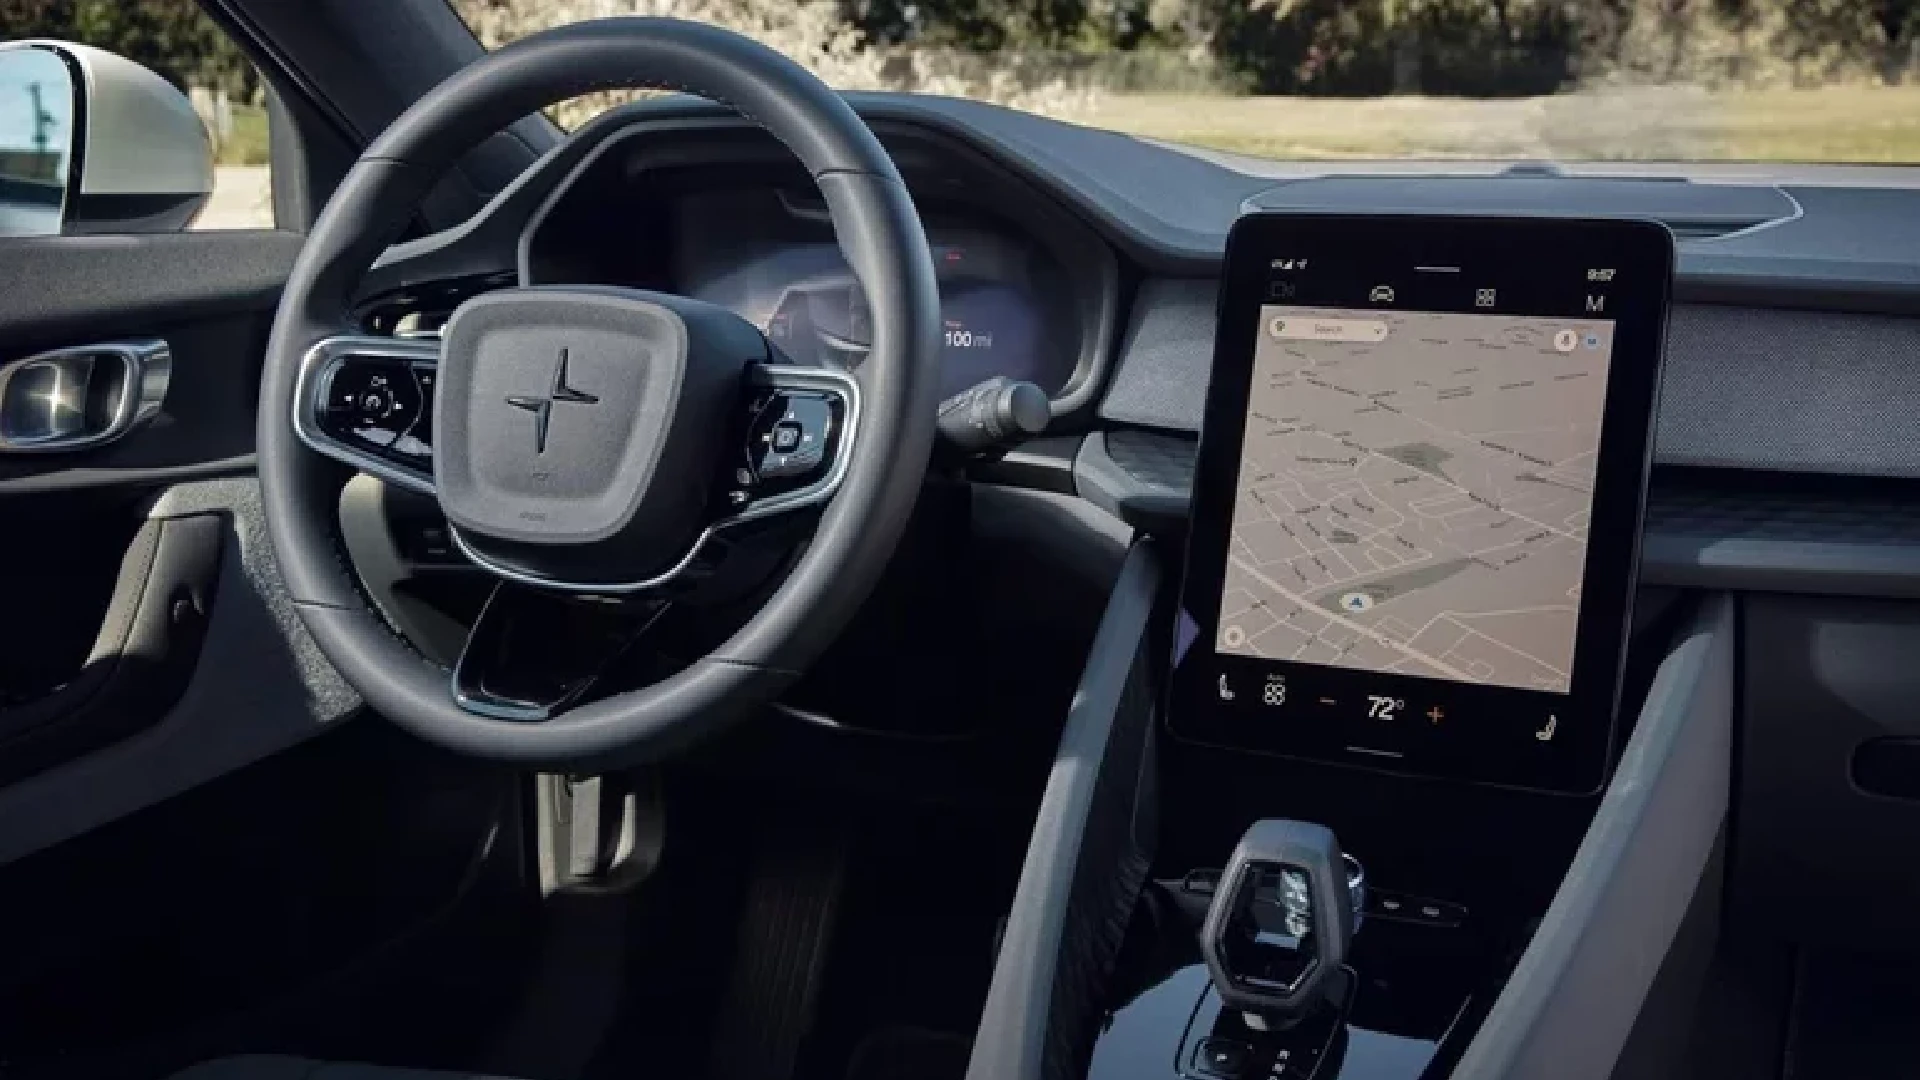 Android Automotive 13 is now available with several behind-the-scenes changes